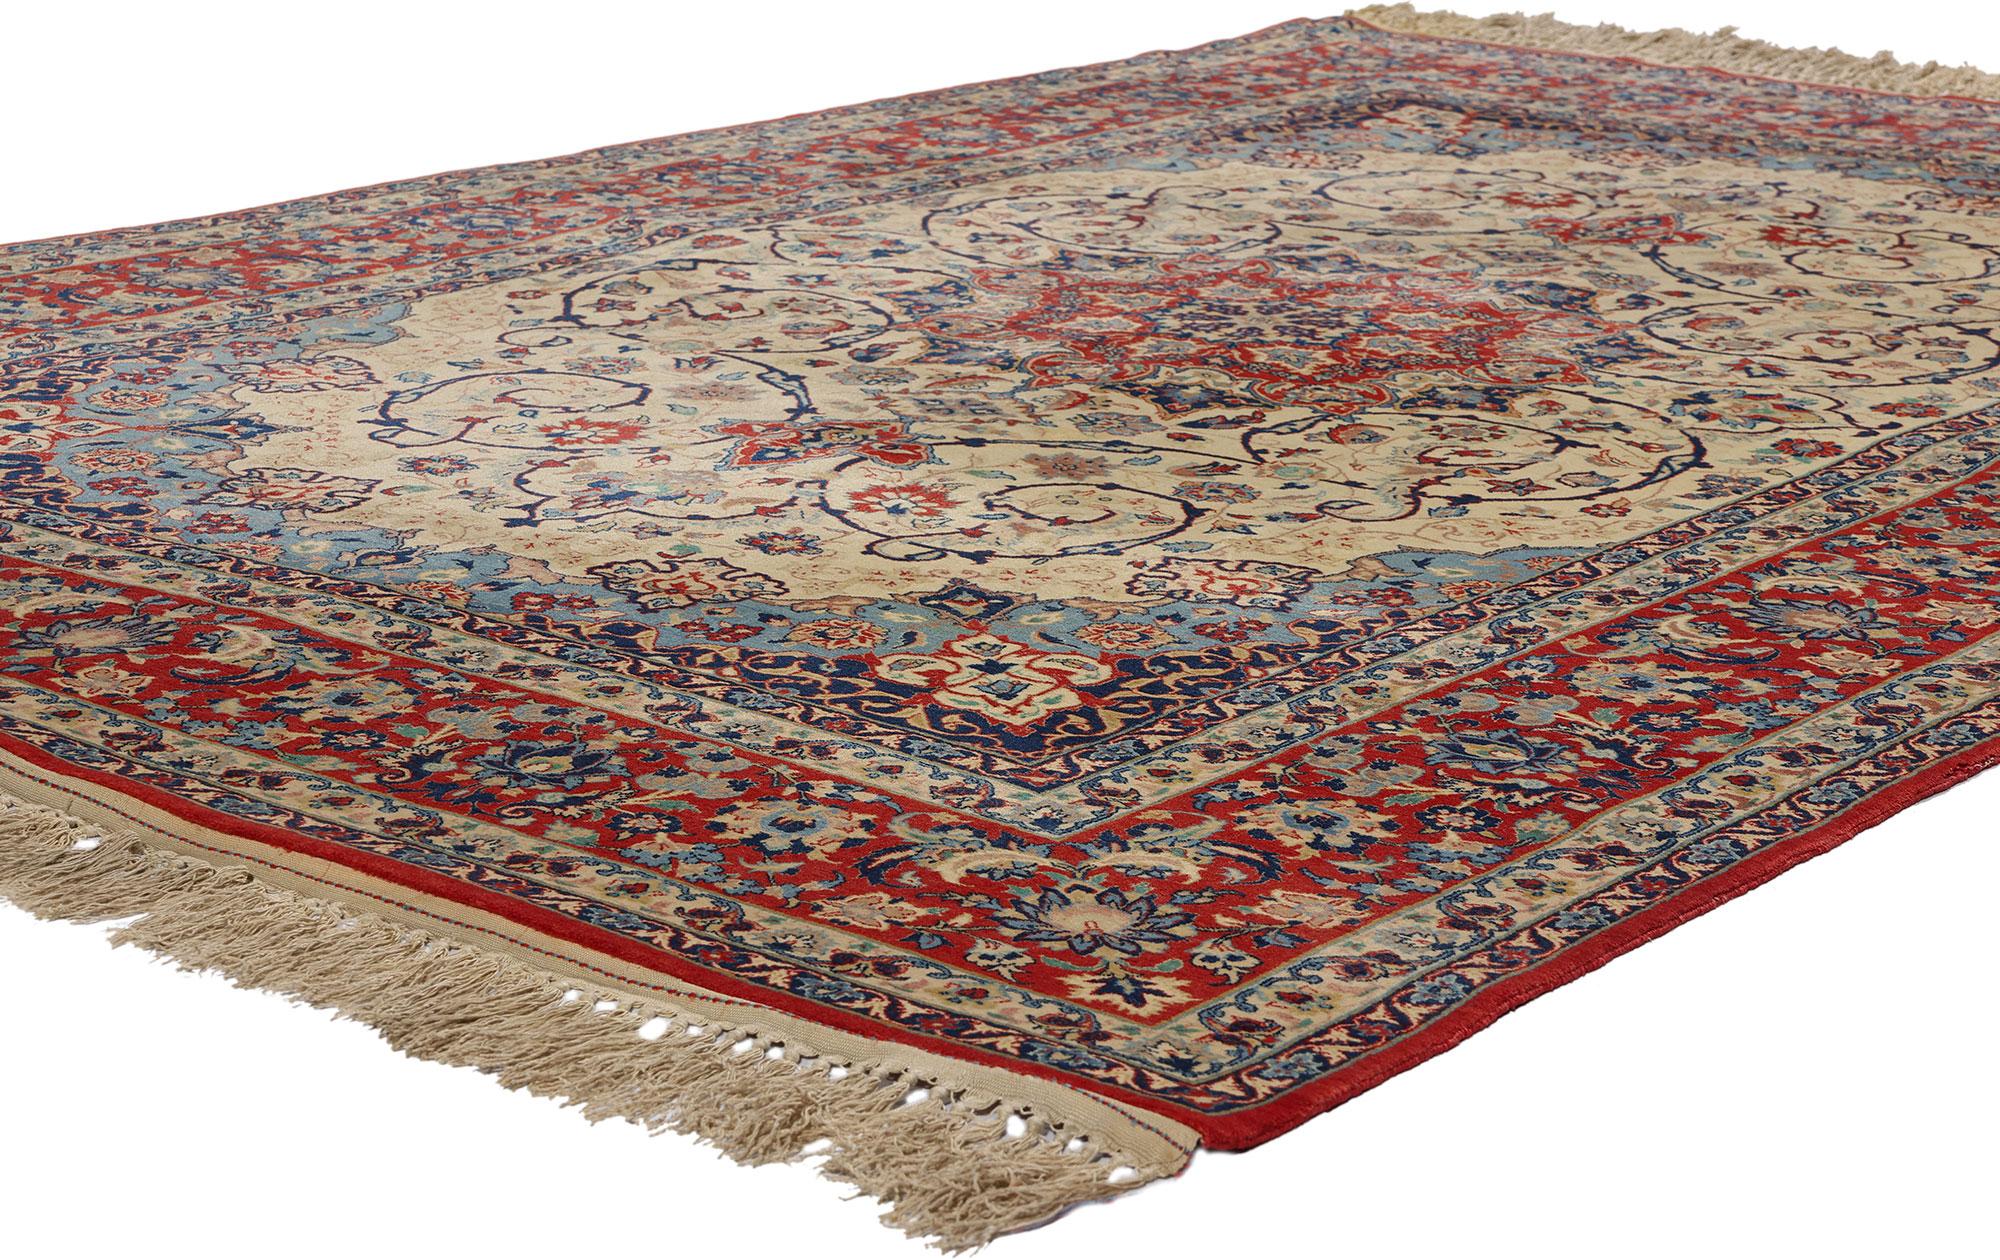 78721 Vintage Persian Isfahan Rug, 05'00 x 07'08. In the heart of central Iran lies a treasure trove of artistry and tradition: the enchanting city of Isfahan. Here, amidst whispers of ancient tales and echoes of skilled artisans, the illustrious